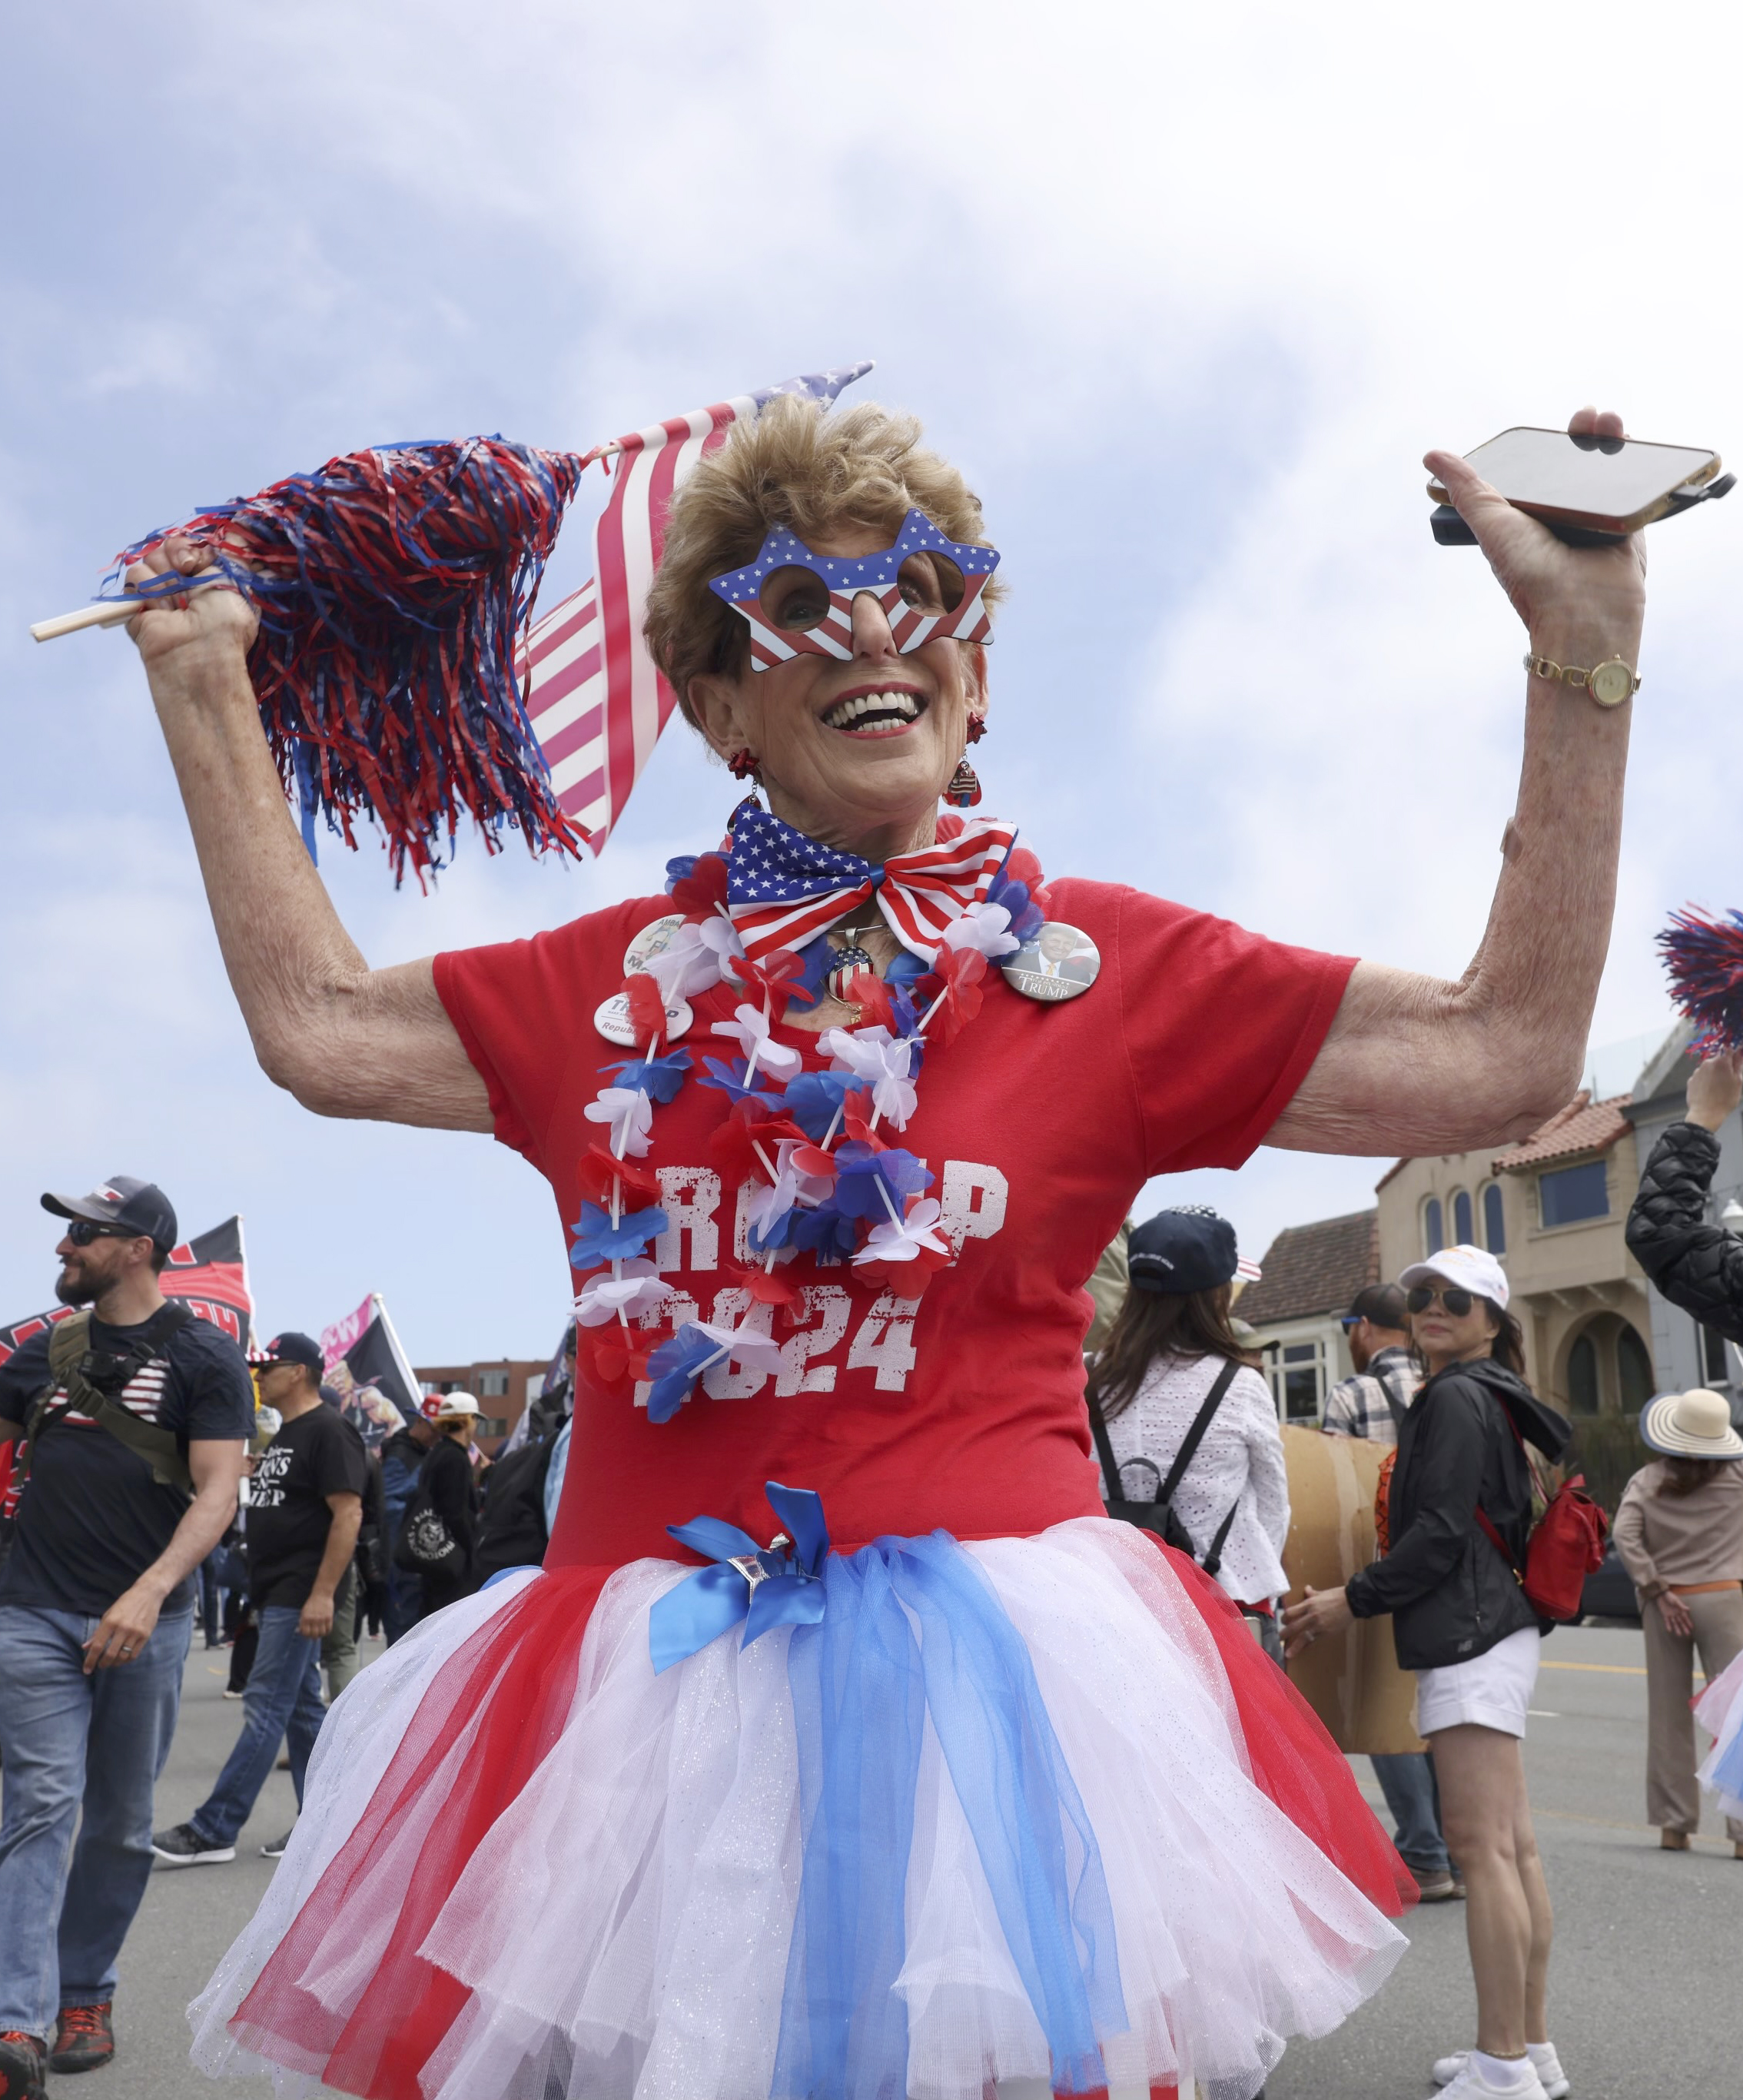 An individual in patriotic attire, featuring a red, white, and blue tutu and star-shaped glasses, is holding pom-poms and a phone during an outdoor event with other participants.